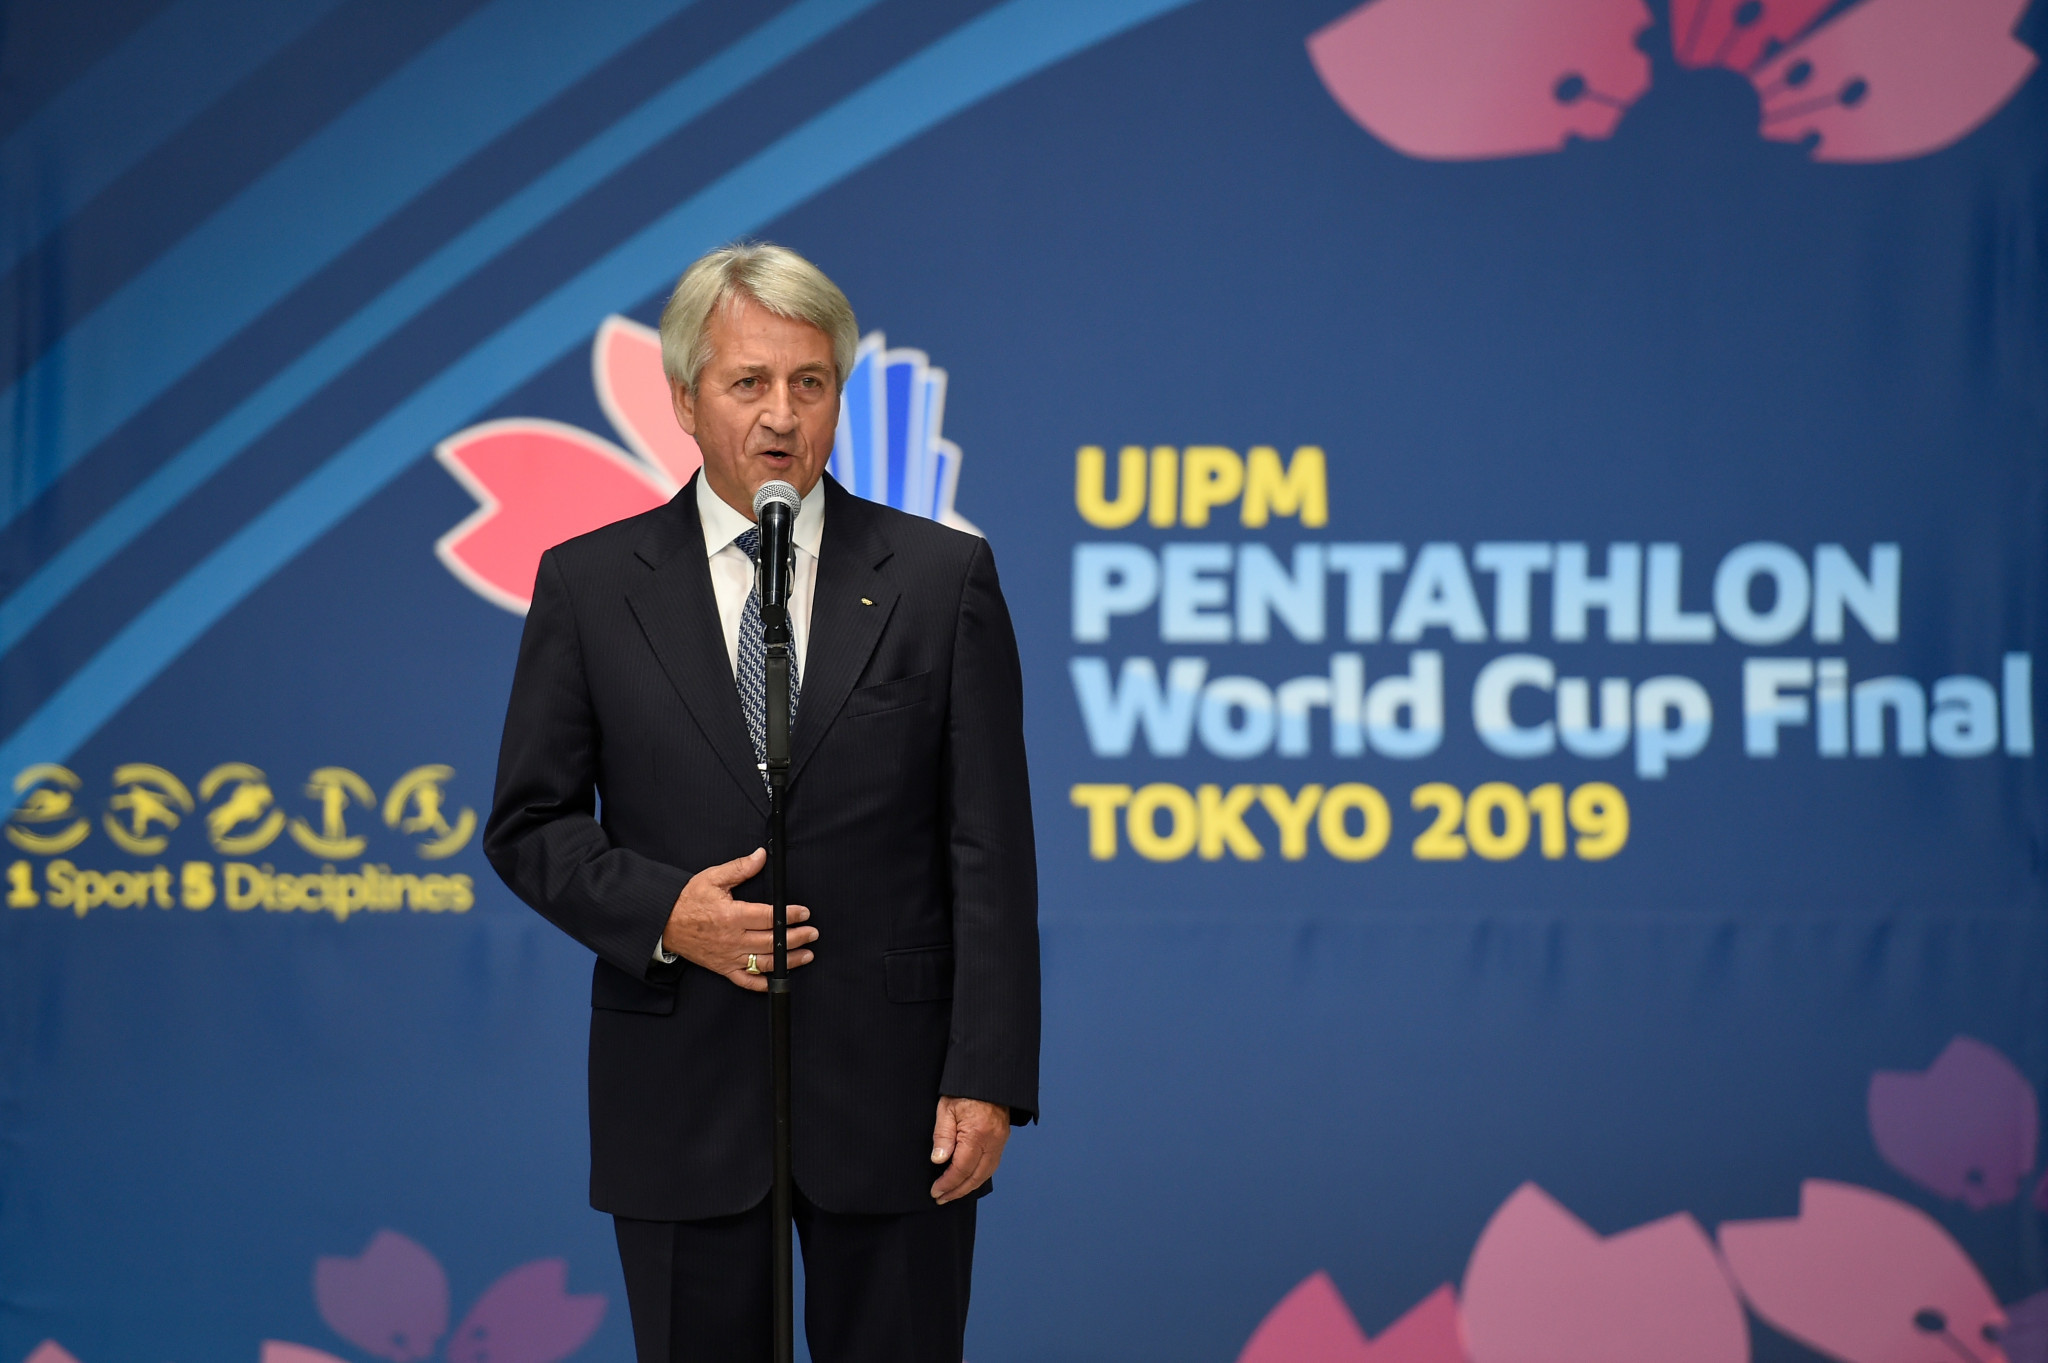 UIPM President Klaus Schormann has faced criticism over the replacement of equestrian from modern pentathlon ©Getty Images